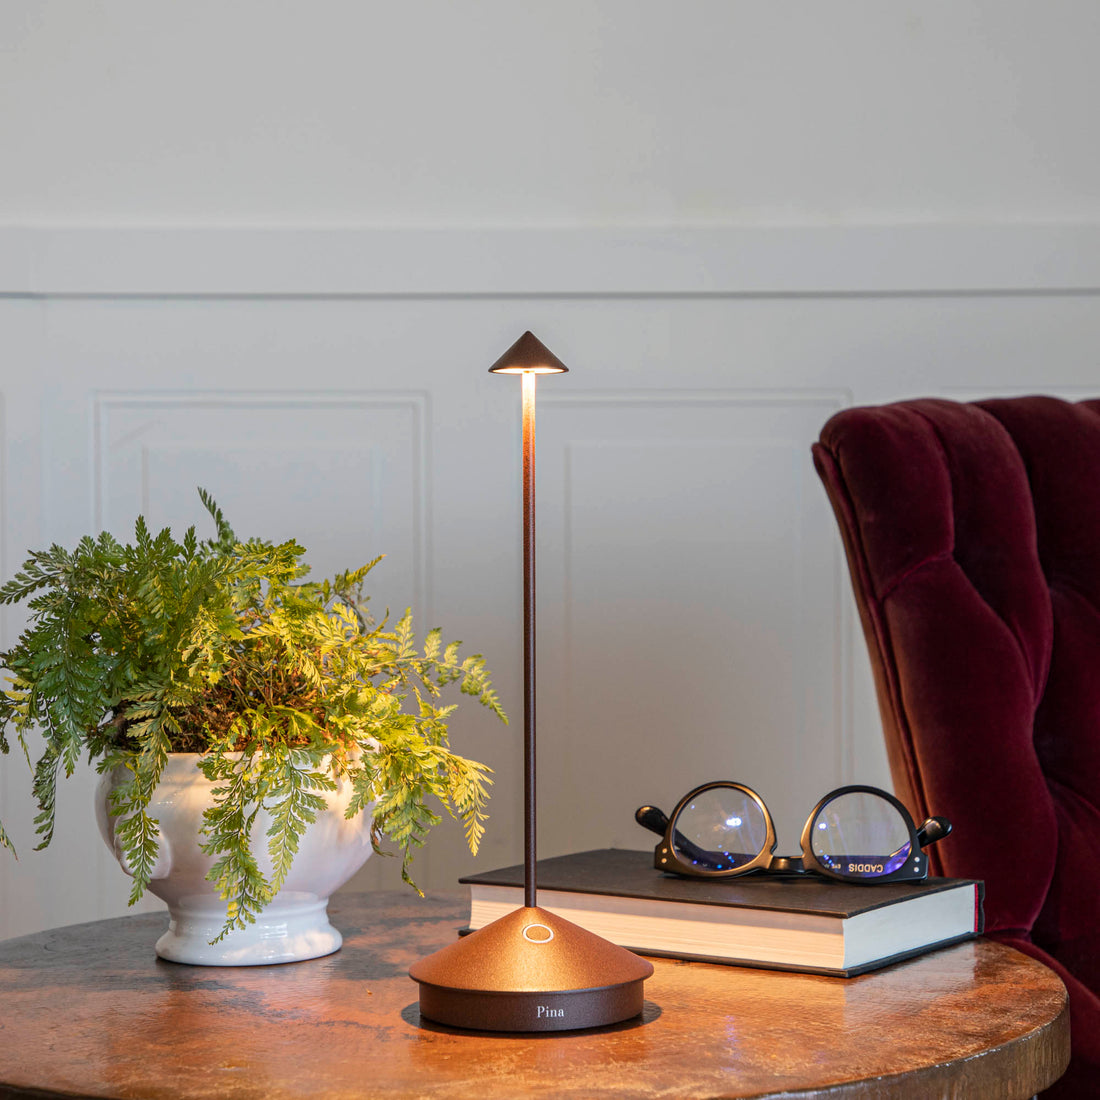 A modern Zafferano Rust LED cordless desk lamp with 3 color temperatures illuminates a cozy reading nook with a plant, glasses, and a book.